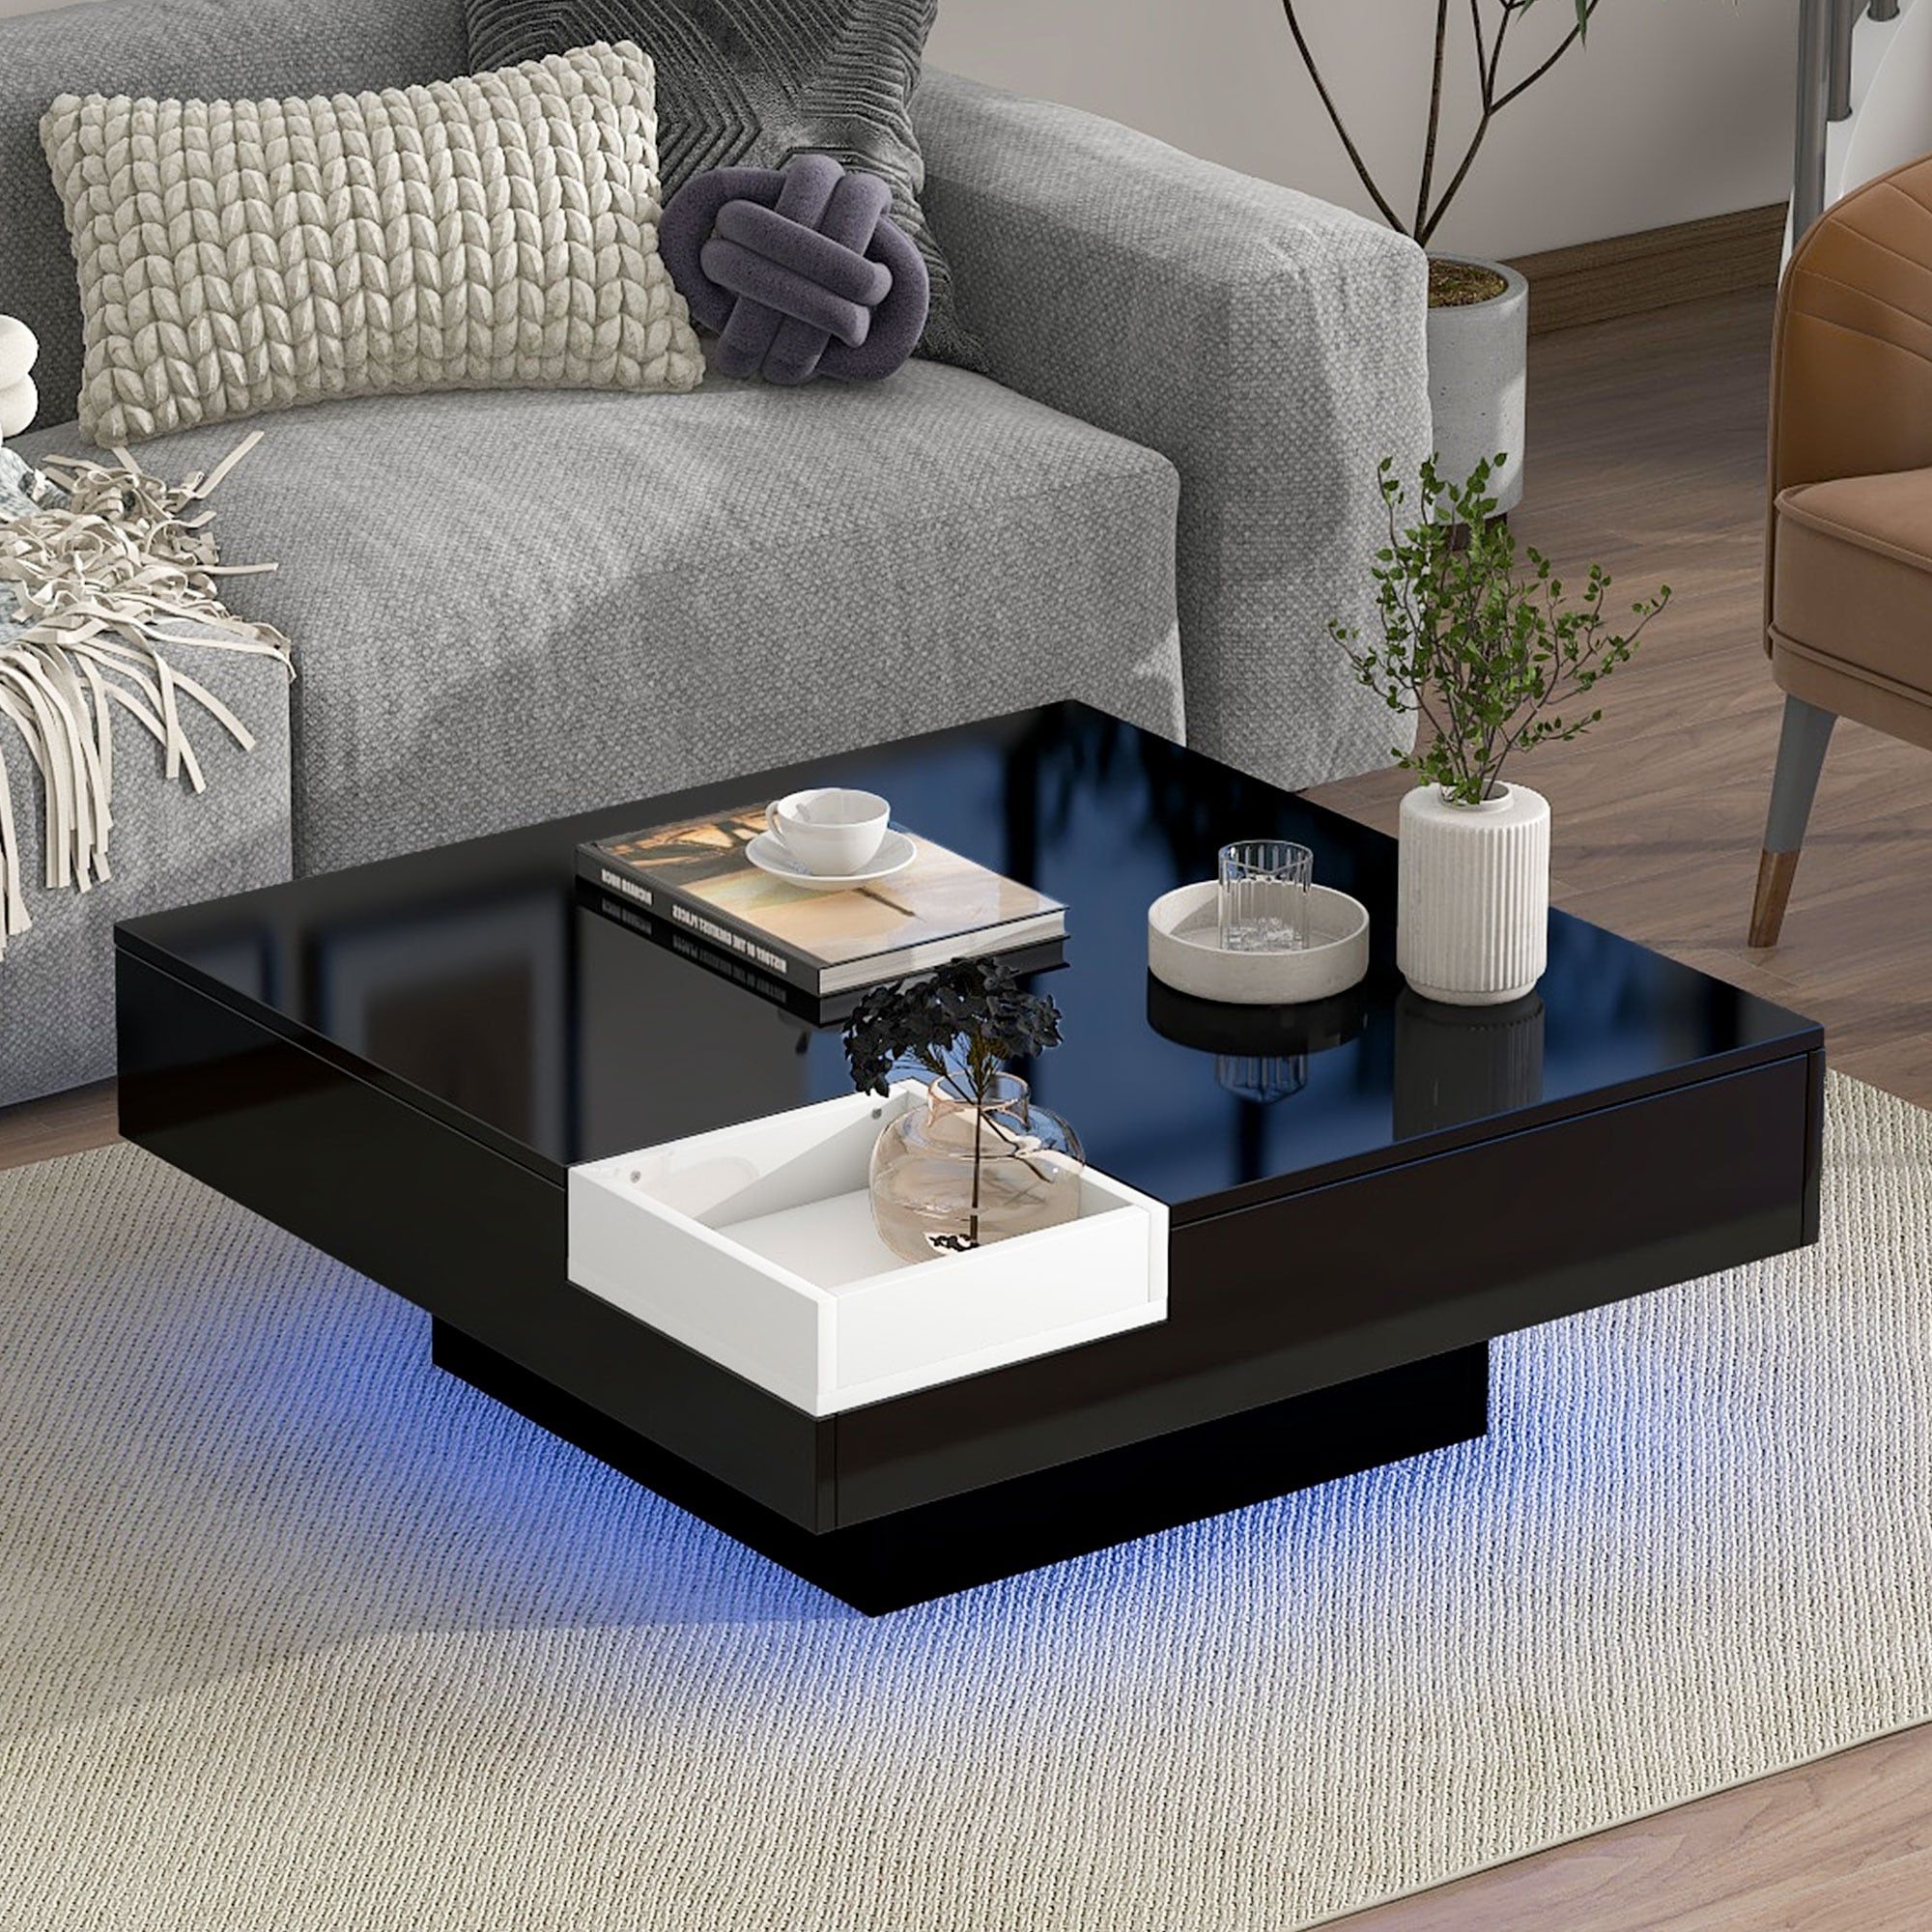 Best And Newest Square Coffee Table With Detachable Tray And Plug In 16 Color Led Strip  Lights Remote Control – Bed Bath & Beyond – 37367161 With Detachable Tray Coffee Tables (View 4 of 10)